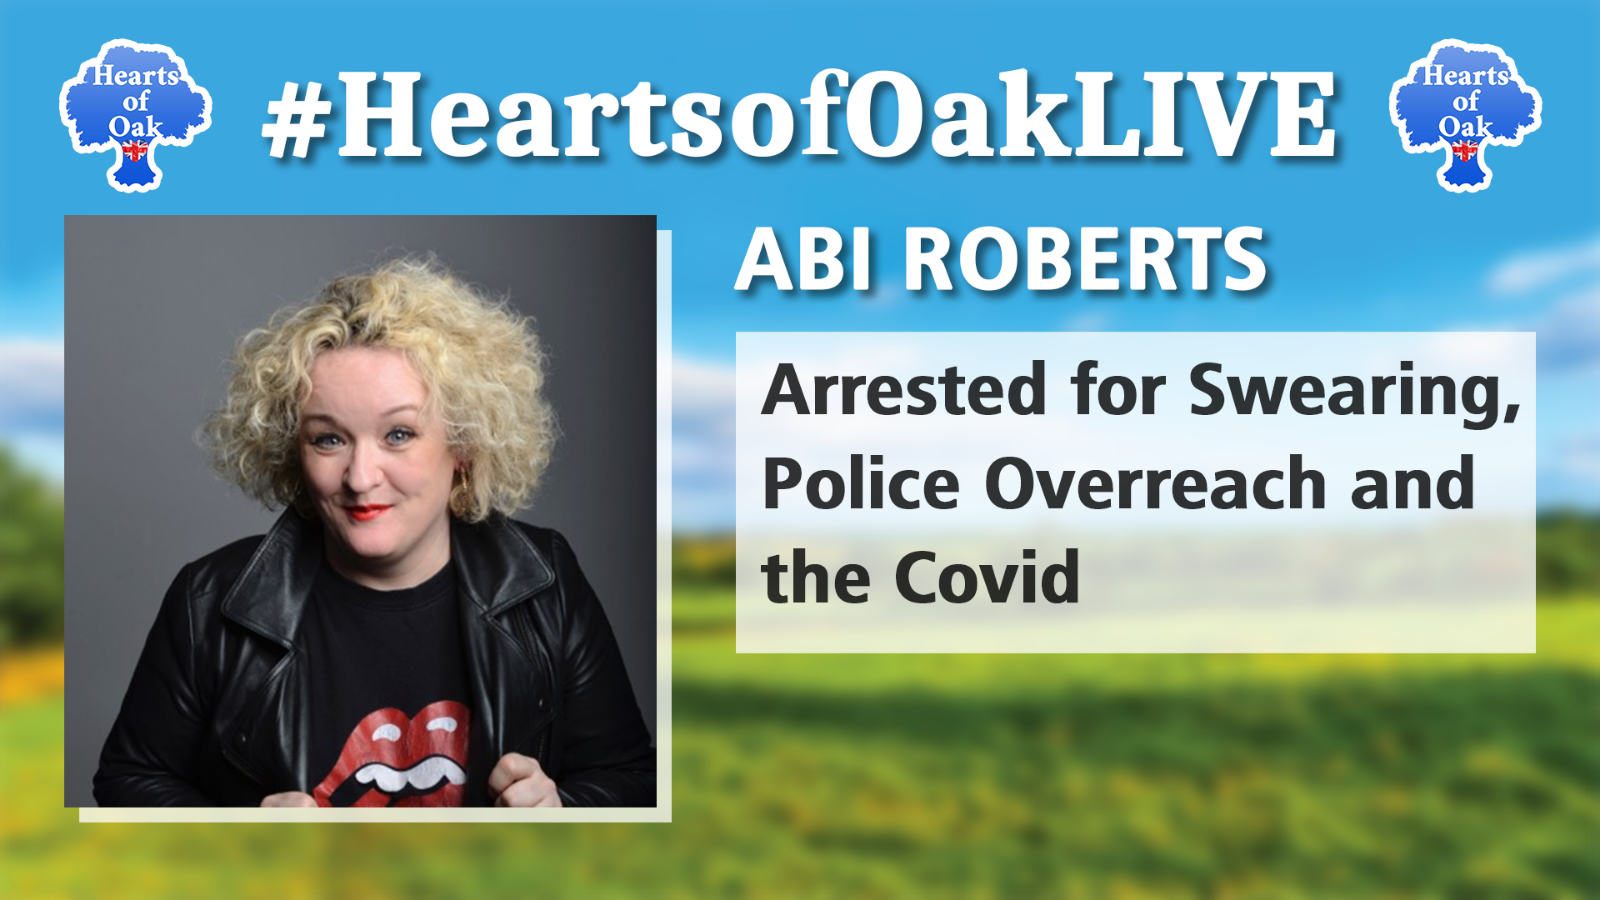 Abi Roberts - Arrested for Swearing, Police Overreach and the COVID Inquiry Whitewash